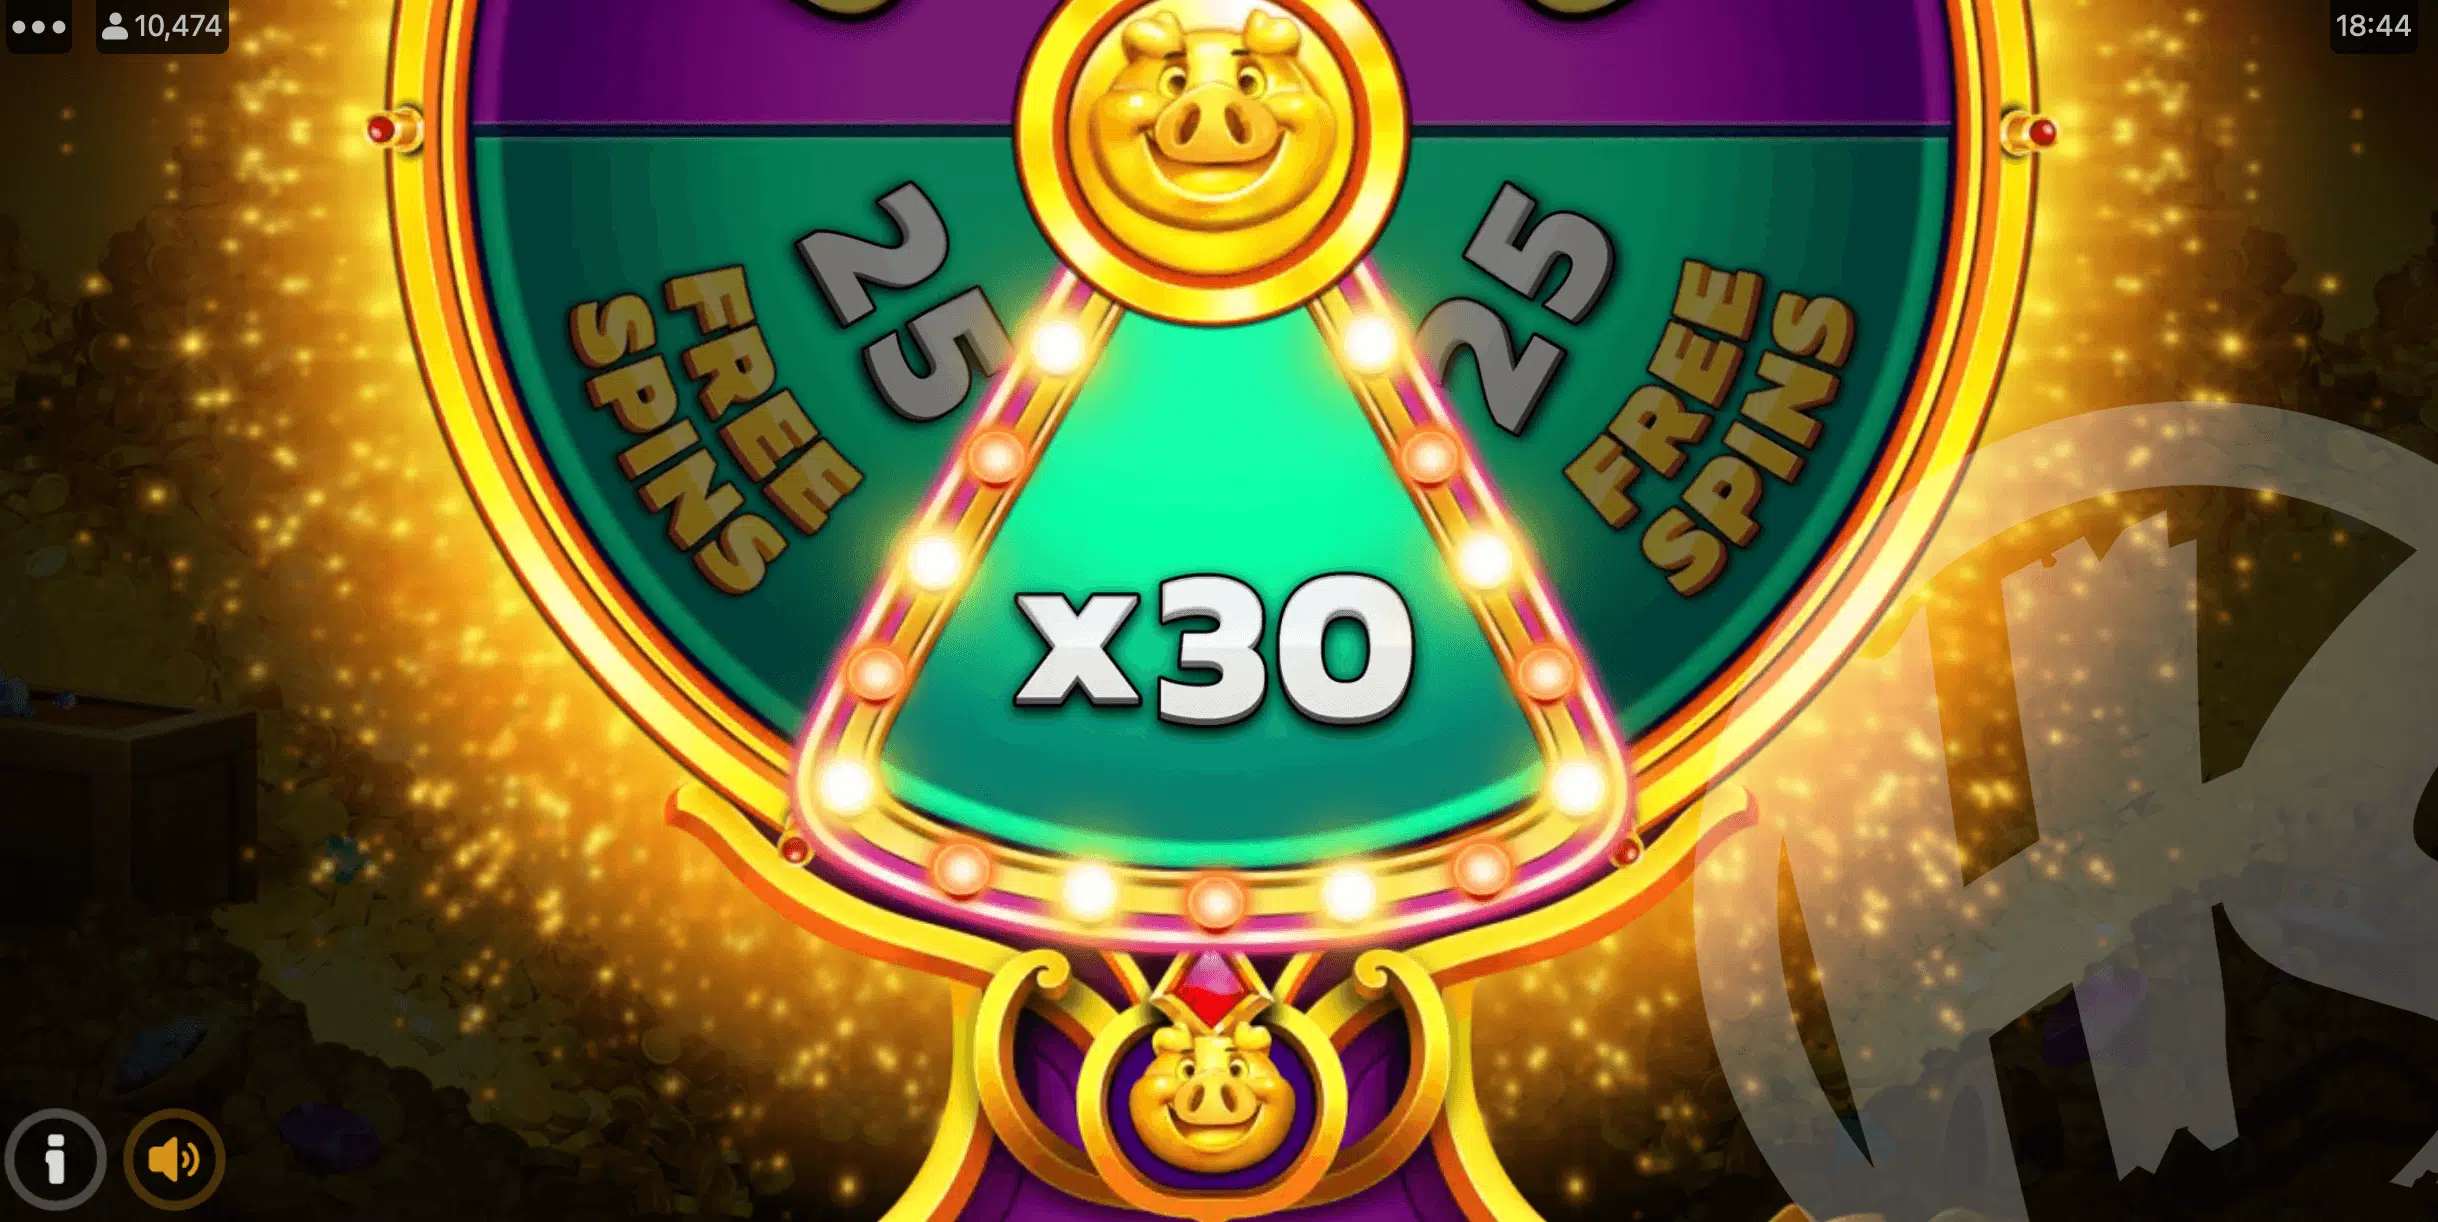 Gamble Up to 30 Free Spins, Revealing a Random 'x bet' Value if the Gamble Loses